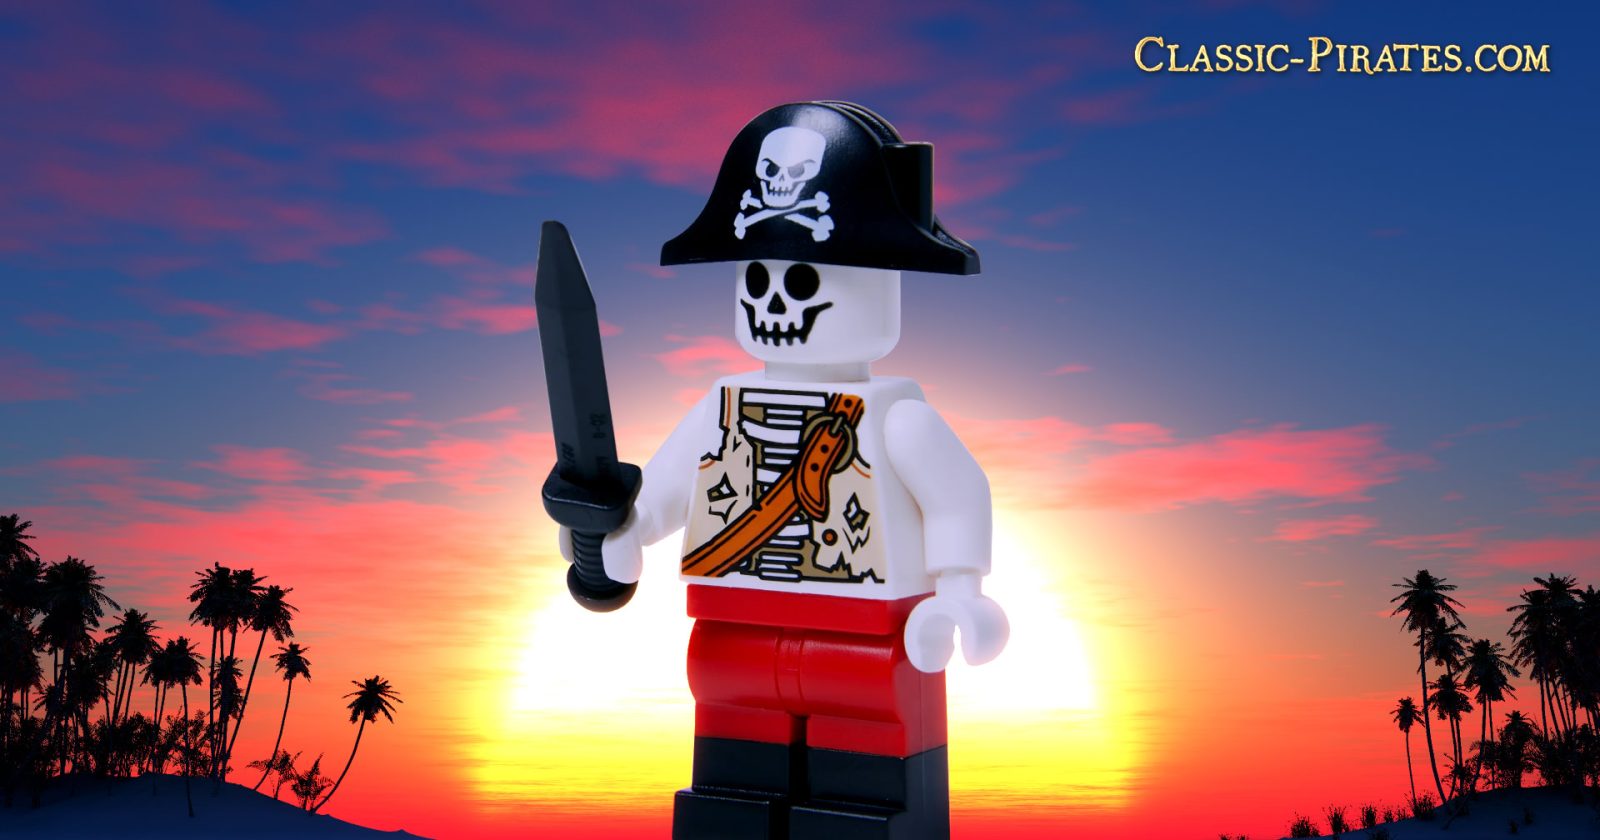 [OFFICIAL] NEW Skeleton Pirate BAM (Build A Minifigure)